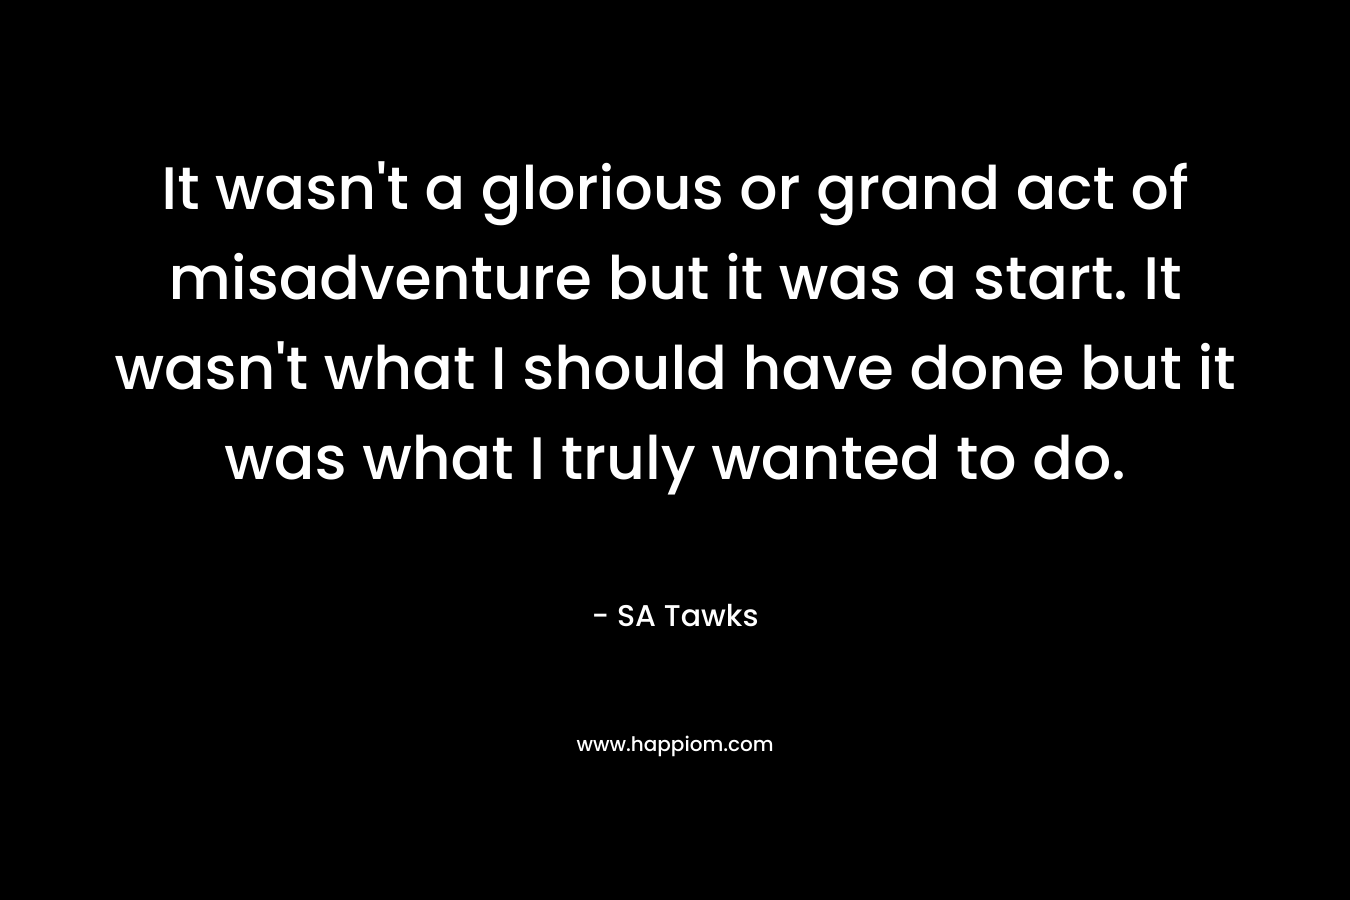 It wasn’t a glorious or grand act of misadventure but it was a start. It wasn’t what I should have done but it was what I truly wanted to do. – SA Tawks